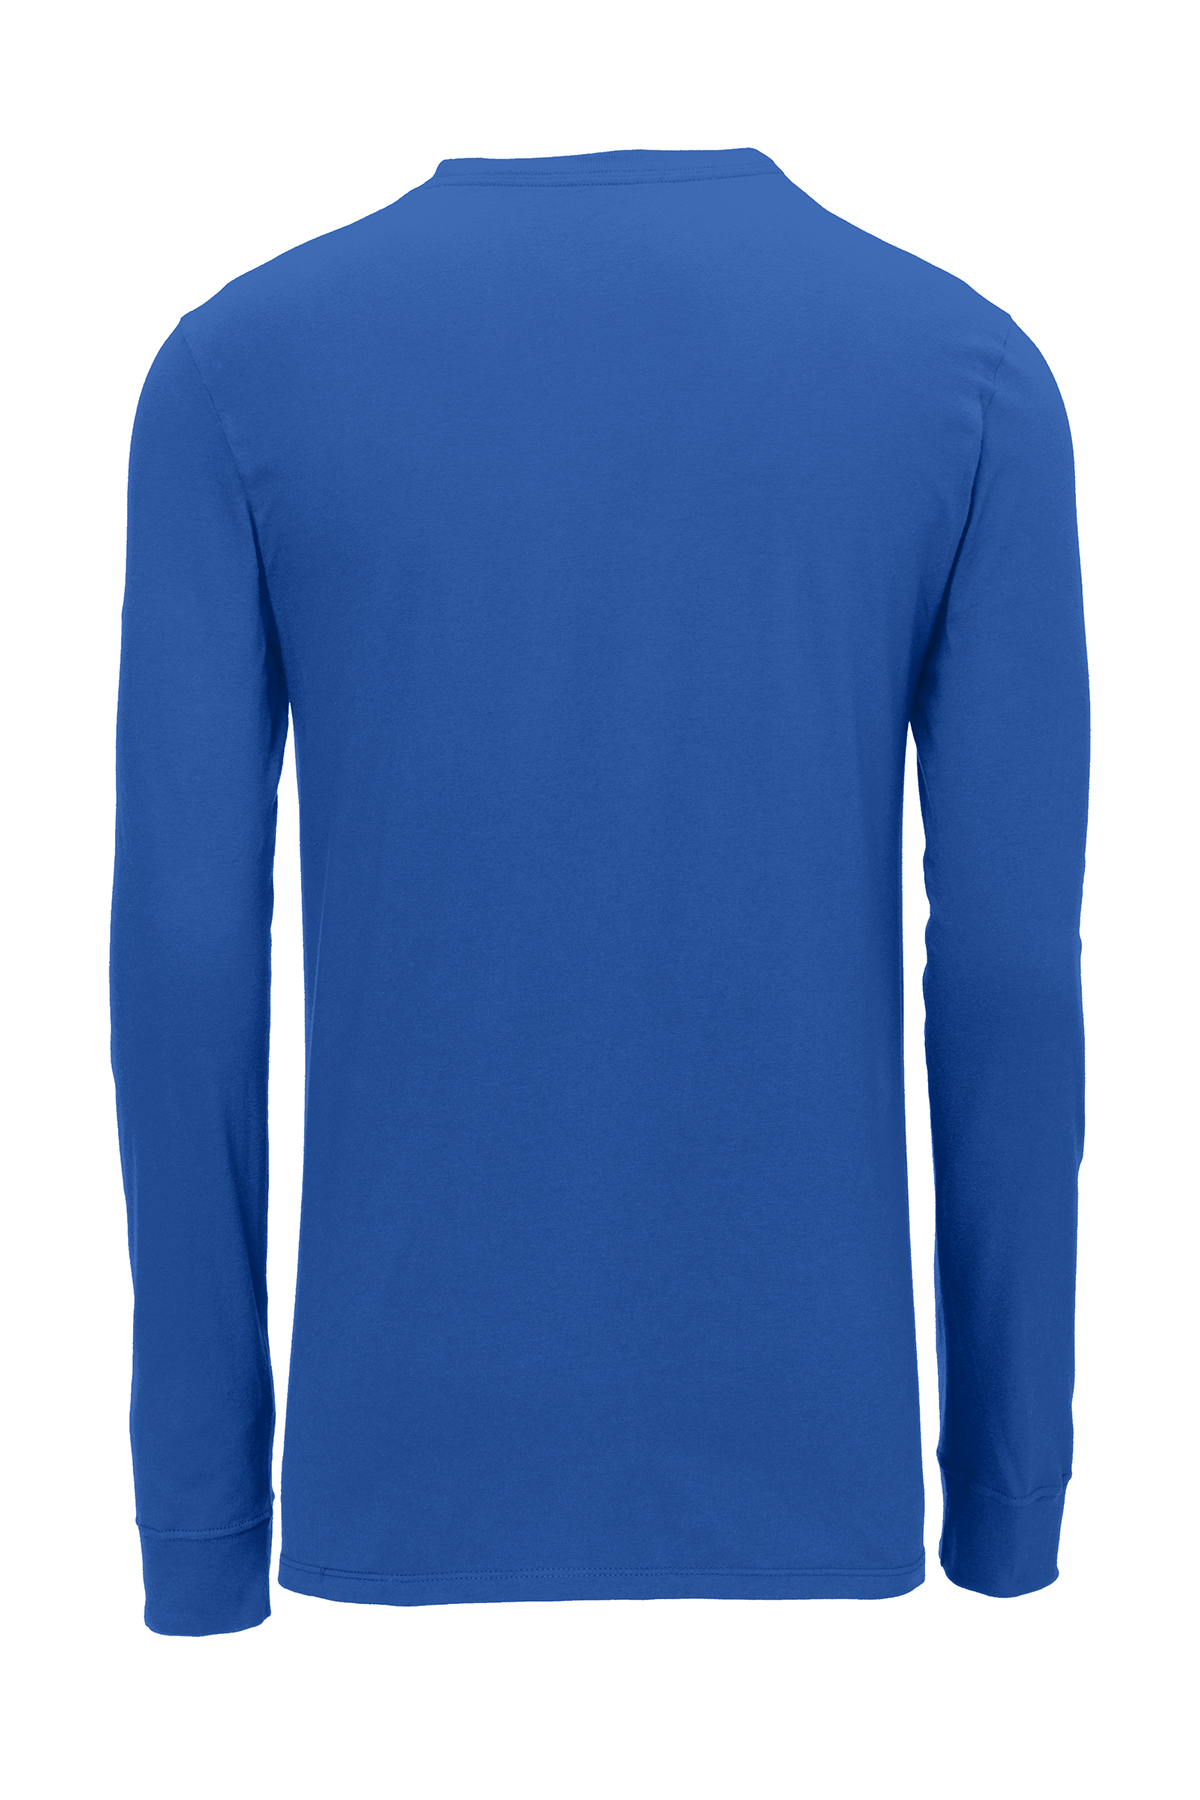 Safe Unparalleled Embody Nike Dri-FIT Cotton/Poly Long Sleeve Tee | Product | SanMar